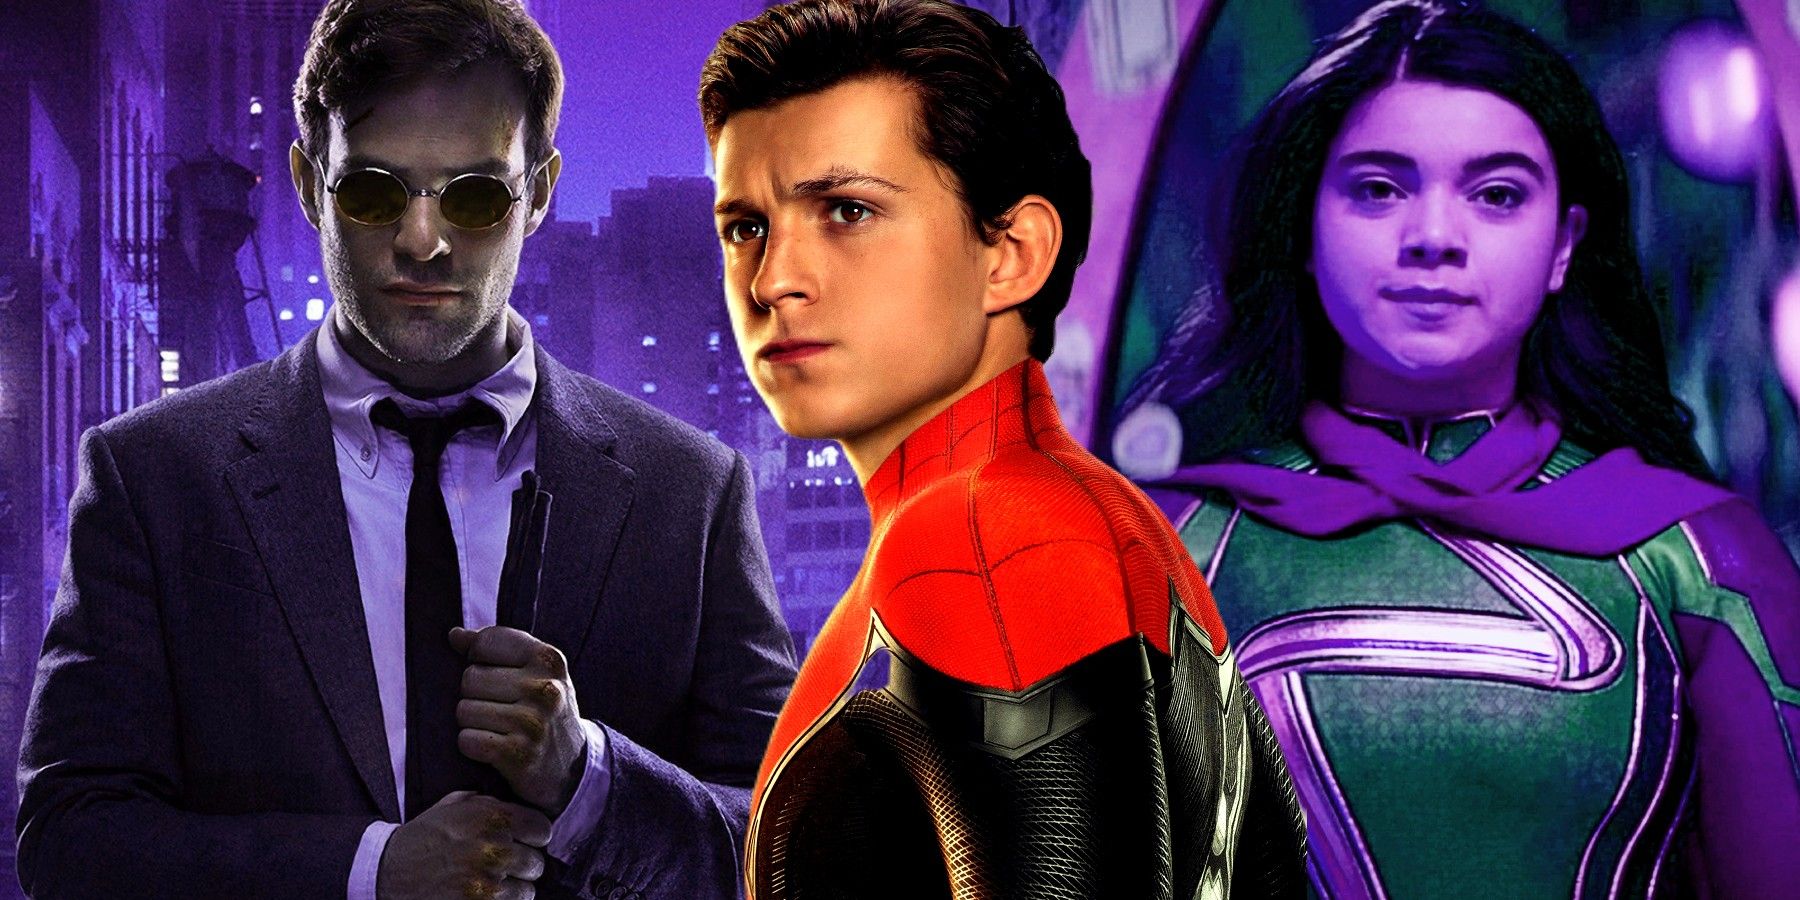 A split image of Spider-Man, Daredevil, and Ms. Marvel in the MCU